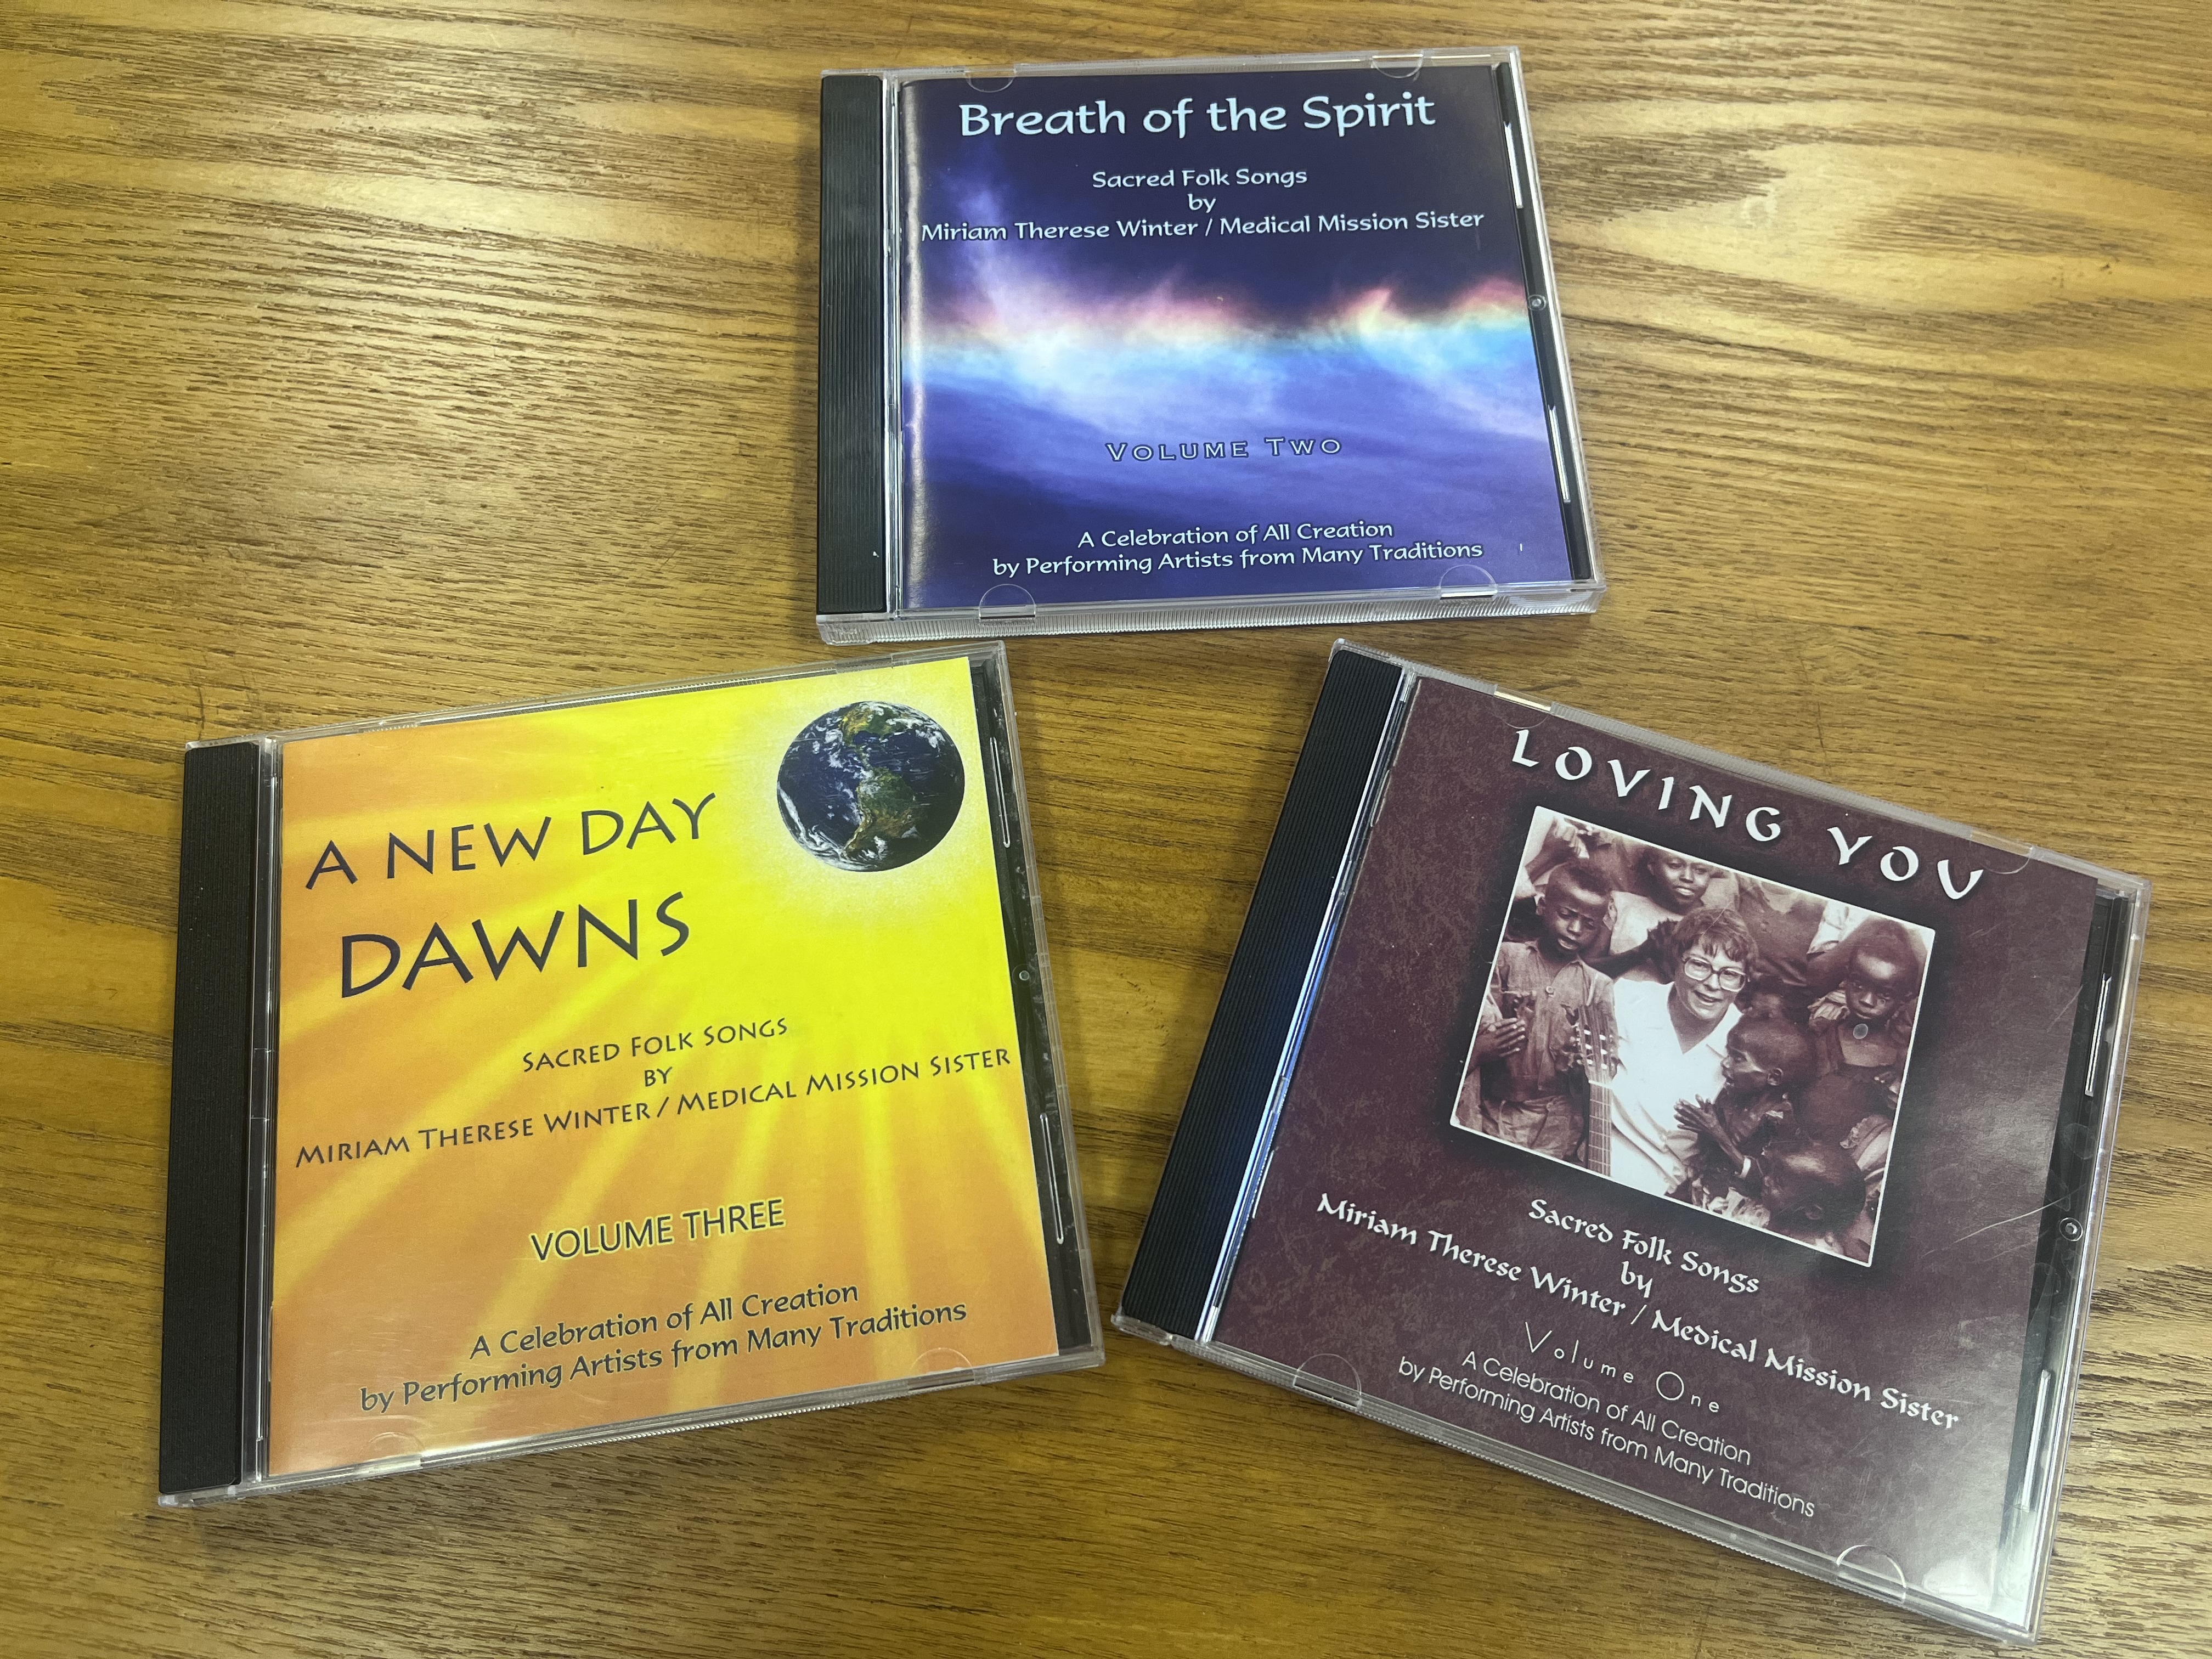 Volumes 1-3 (Loving You, Breath of the Spirit, and A New Day Dawns)